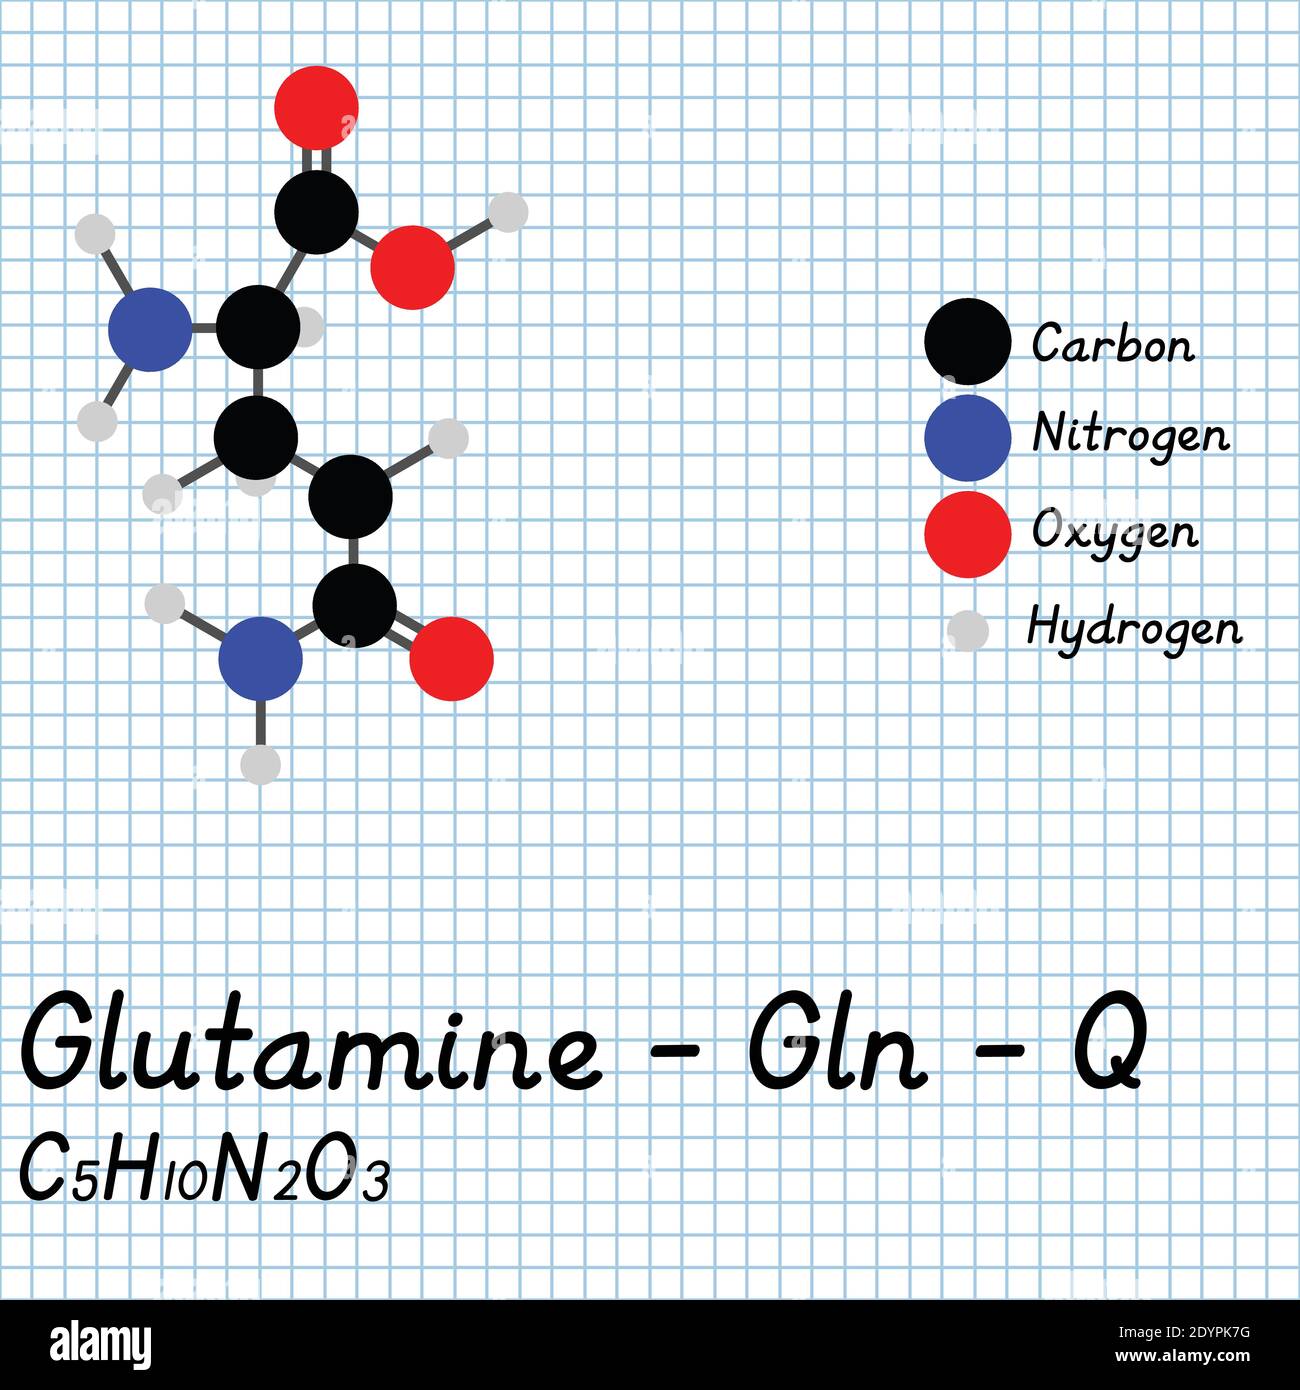 Glutamine - Gln - Q Amino Acid molecular formula and chemical structure . 2D Ball and stick model on school paper sheet background. EPS10 Stock Vector